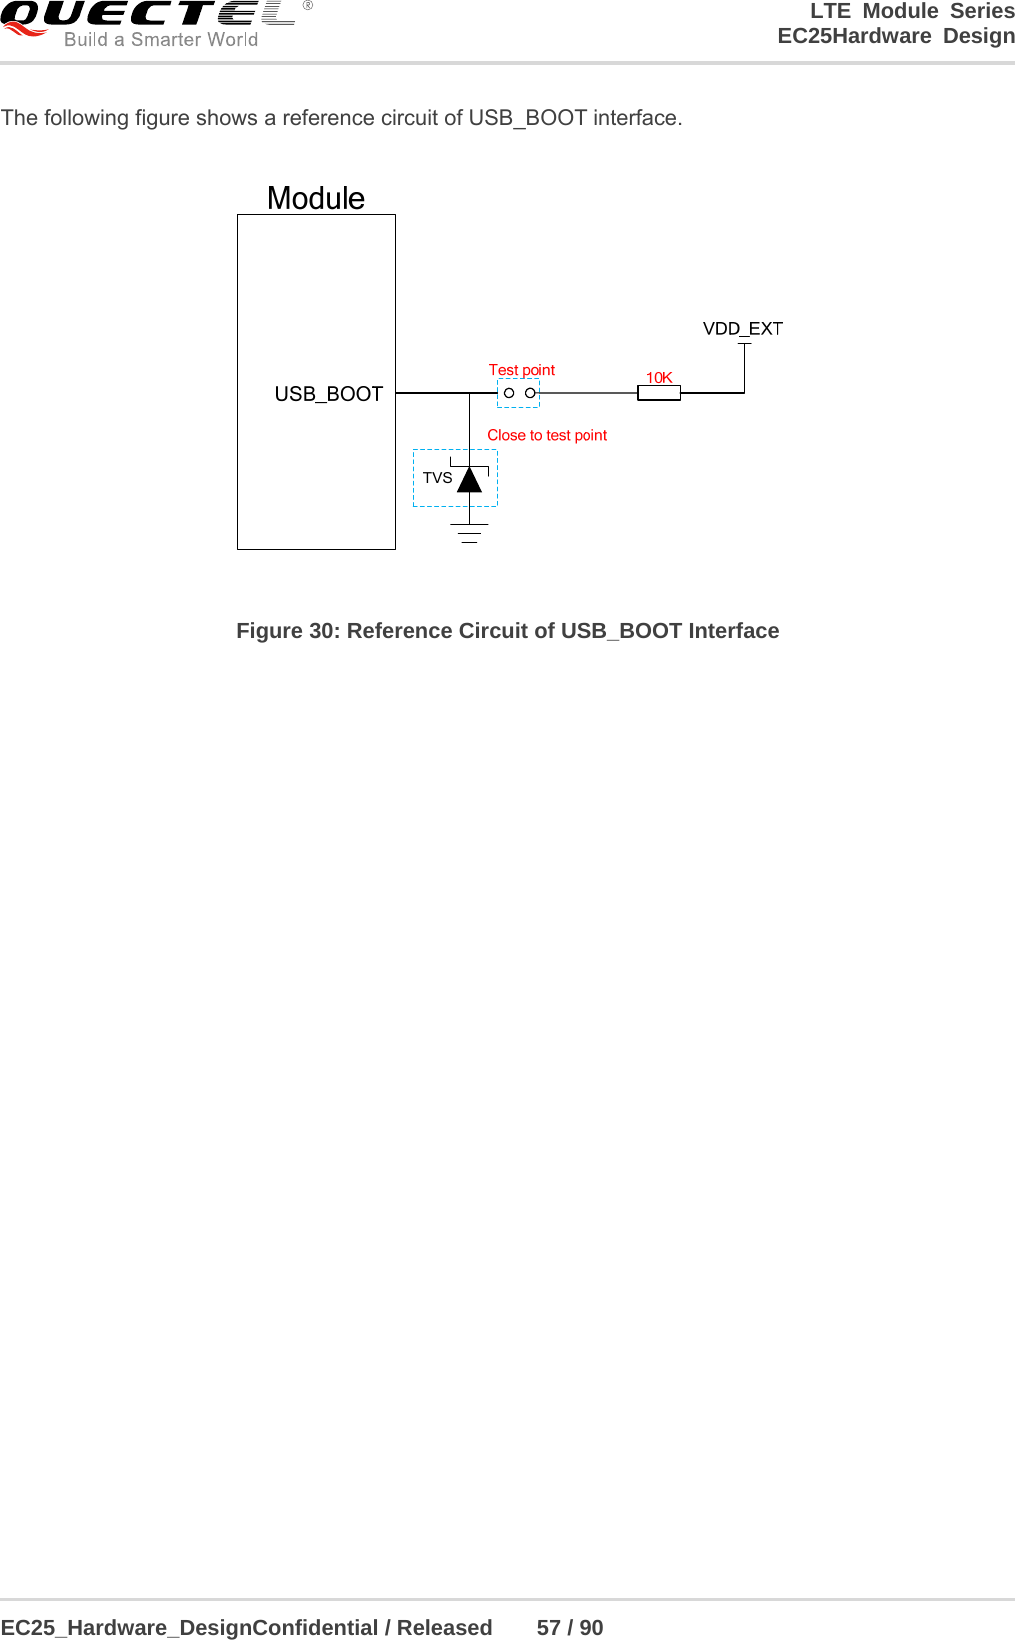 LTE Module Series                                                  EC25Hardware Design  EC25_Hardware_DesignConfidential / Released    57 / 90    The following figure shows a reference circuit of USB_BOOT interface.  Figure 30: Reference Circuit of USB_BOOT Interface  